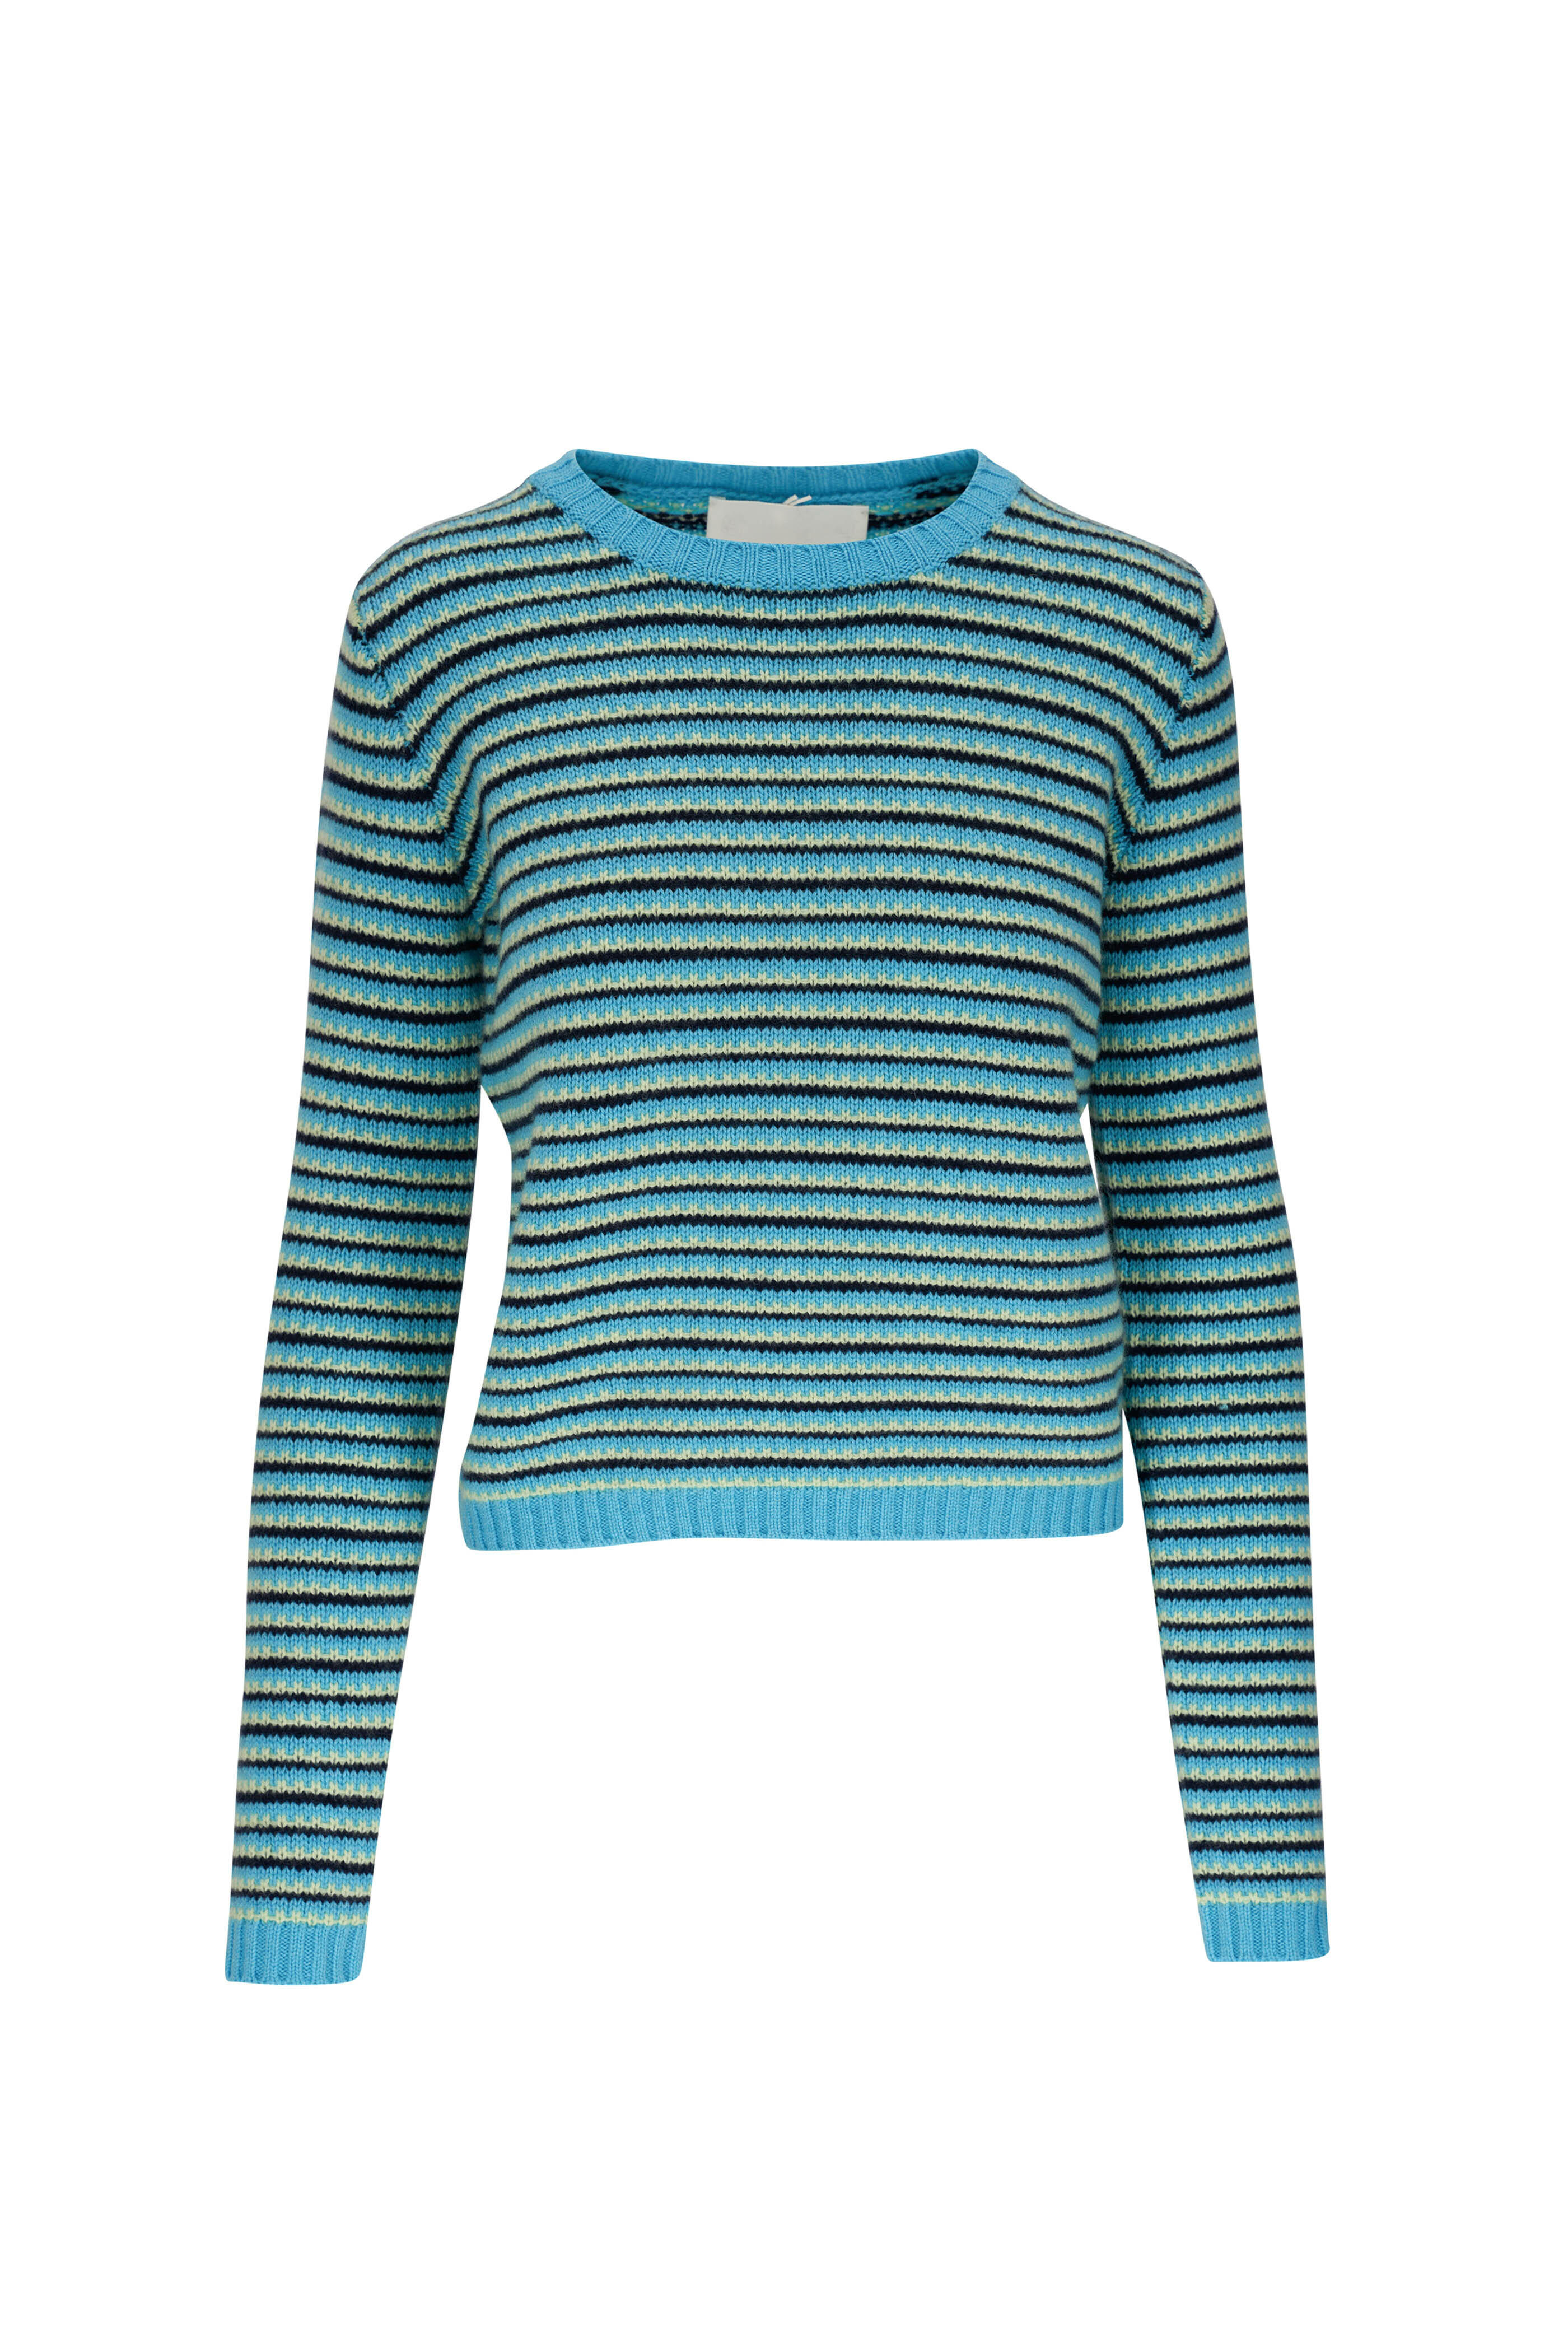 Lisa Yang - Mable Blue, Navy & Mint Striped Cashmere Sweater